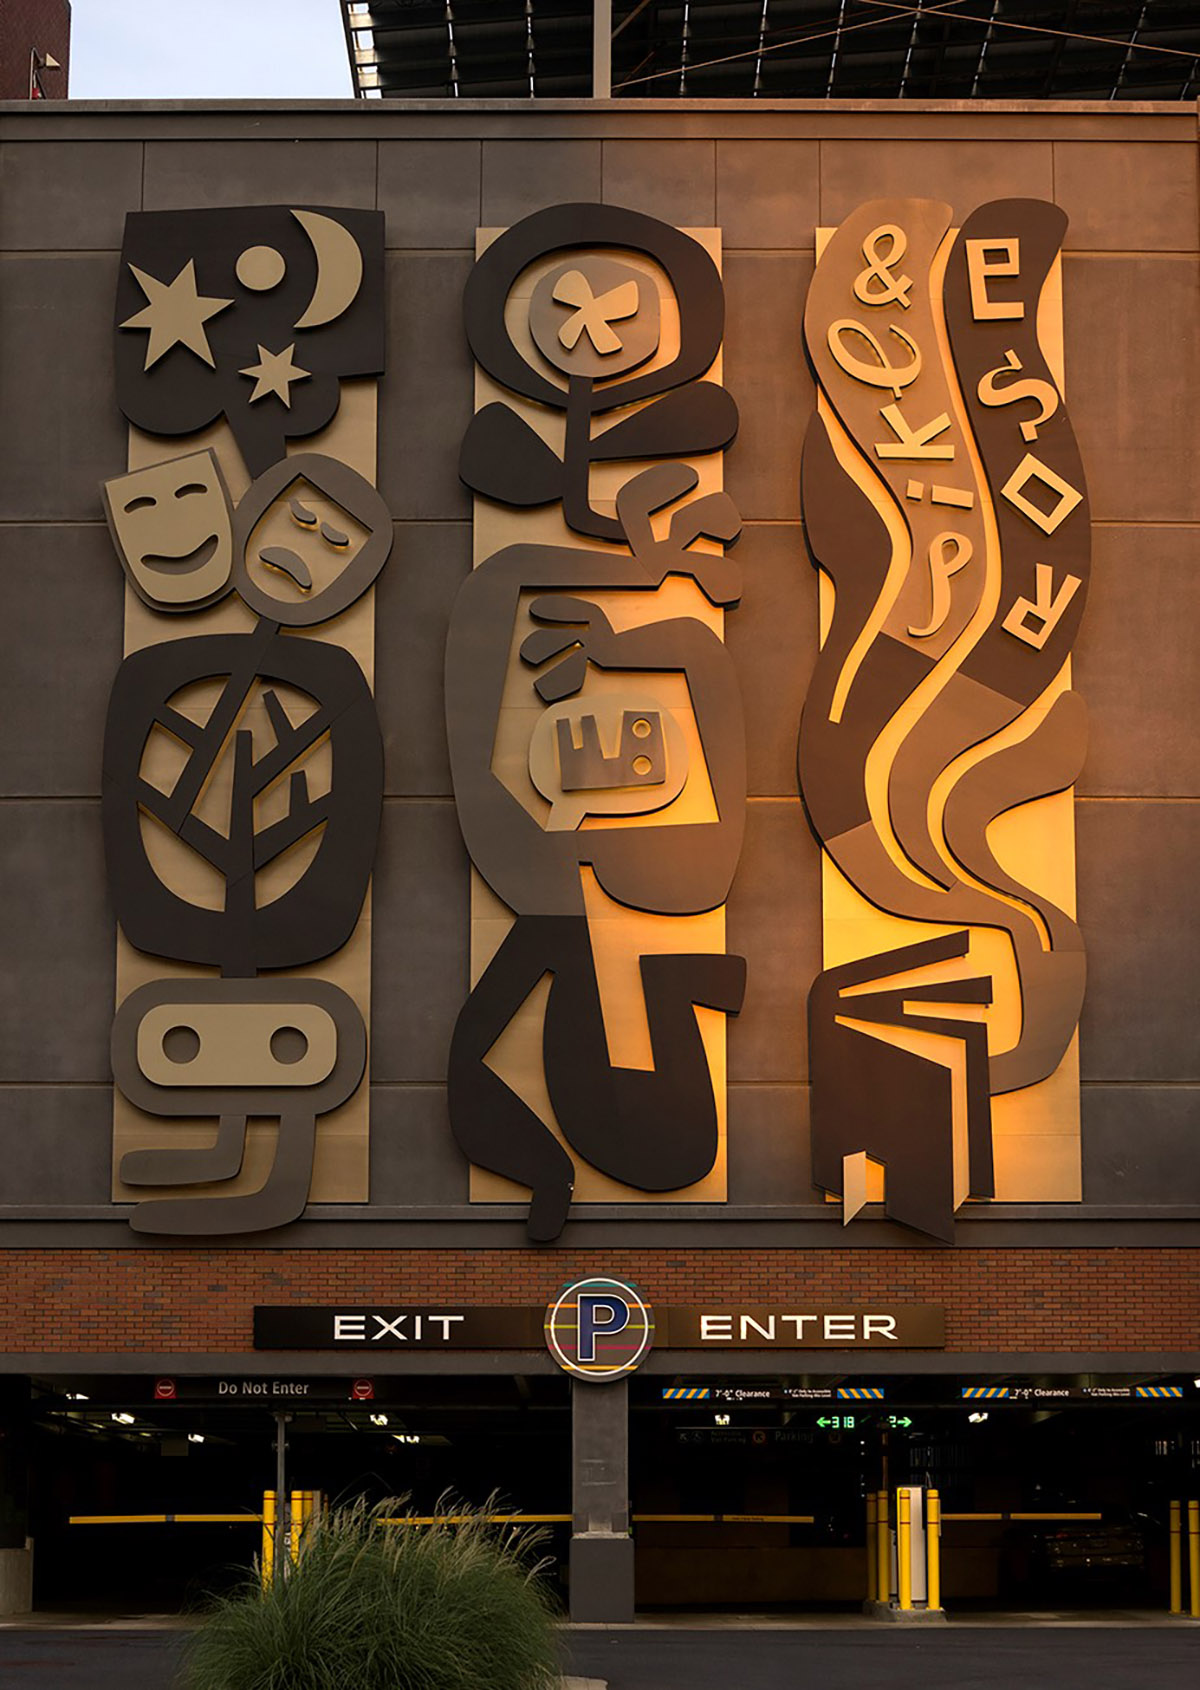 Public art can also be realized in the signage to add color and character to the place. At Pike and Rose, this public art creates the gateway into the public parking garage.